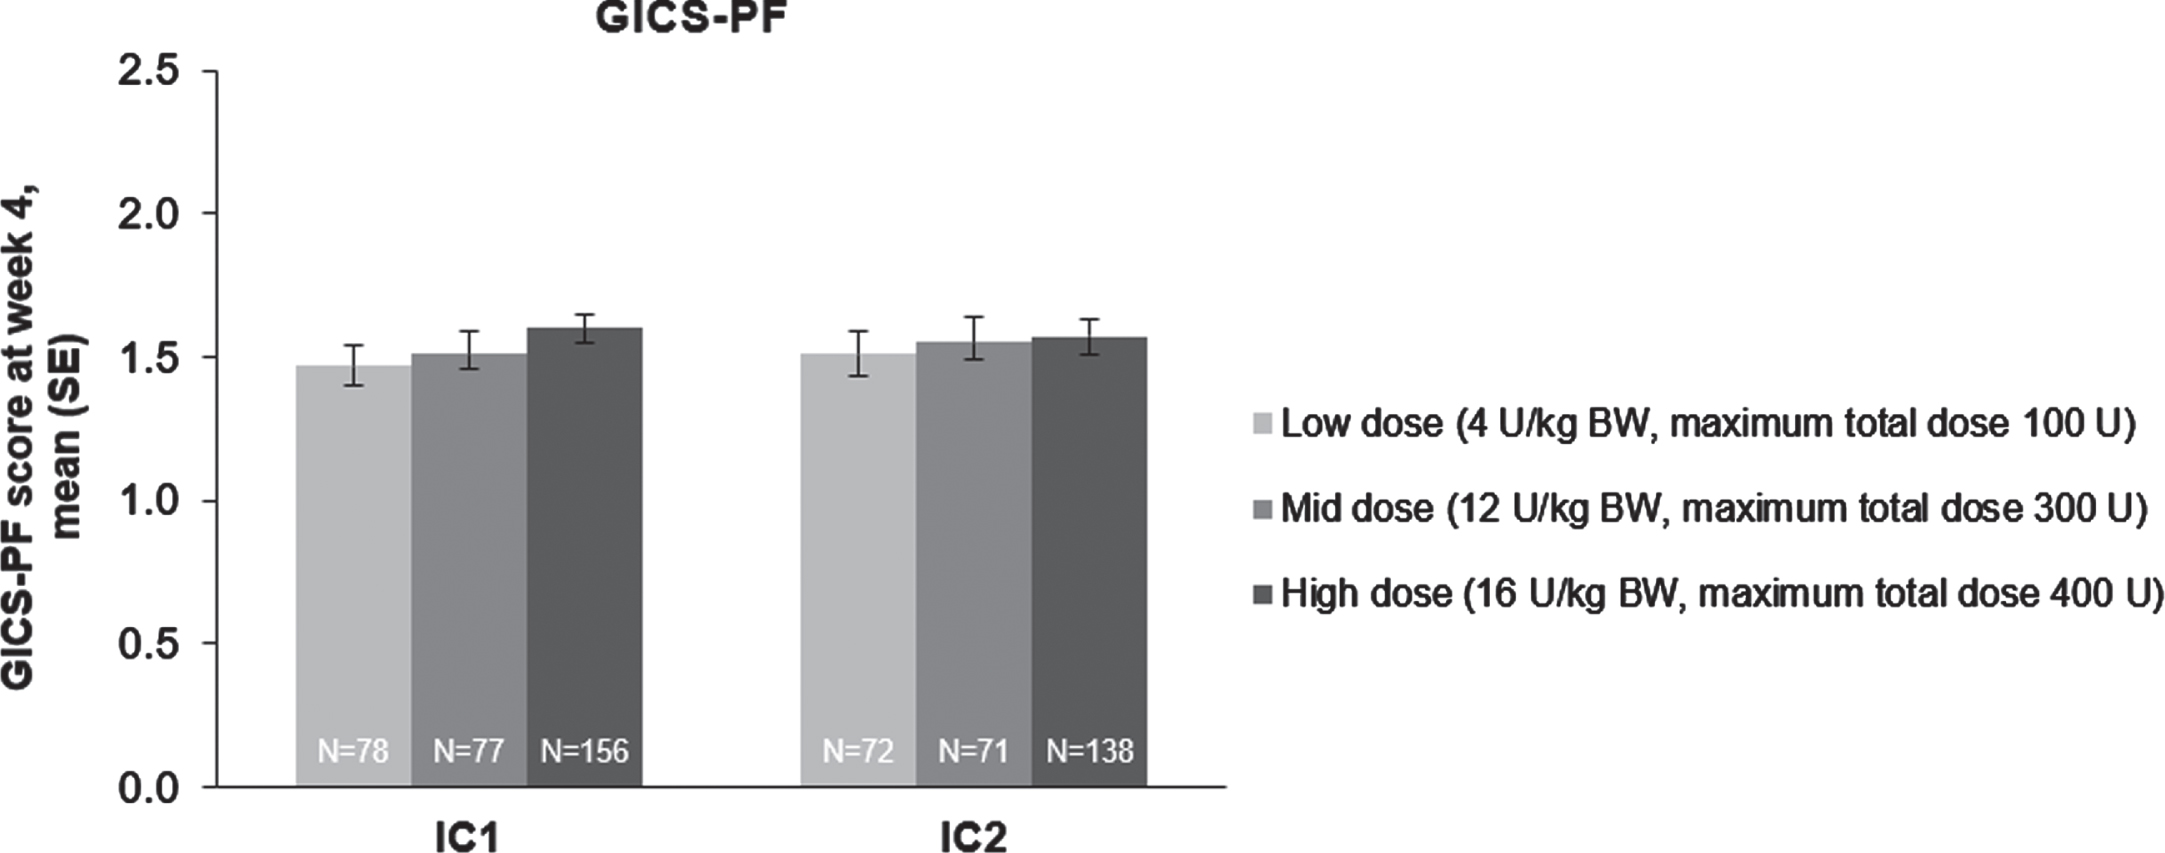 The effect of incobotulinumtoxinA on investigator’s GICS-PF score at week 4; FAS, OC. Investigators were asked to rate their overall impression of change in spasticity of the PFs compared with the condition before the last injection; positive values indicate better results. Investigator’s GICS-PF score at week 4 was the coprimary efficacy variable. BW = body weight; FAS = full analysis set; GICS-PF = Global Impression of Change of Plantar Flexor Spasticity Scale; IC = injection cycle; kg = kilogram; OC = observed cases; SE = standard error; U = unit.